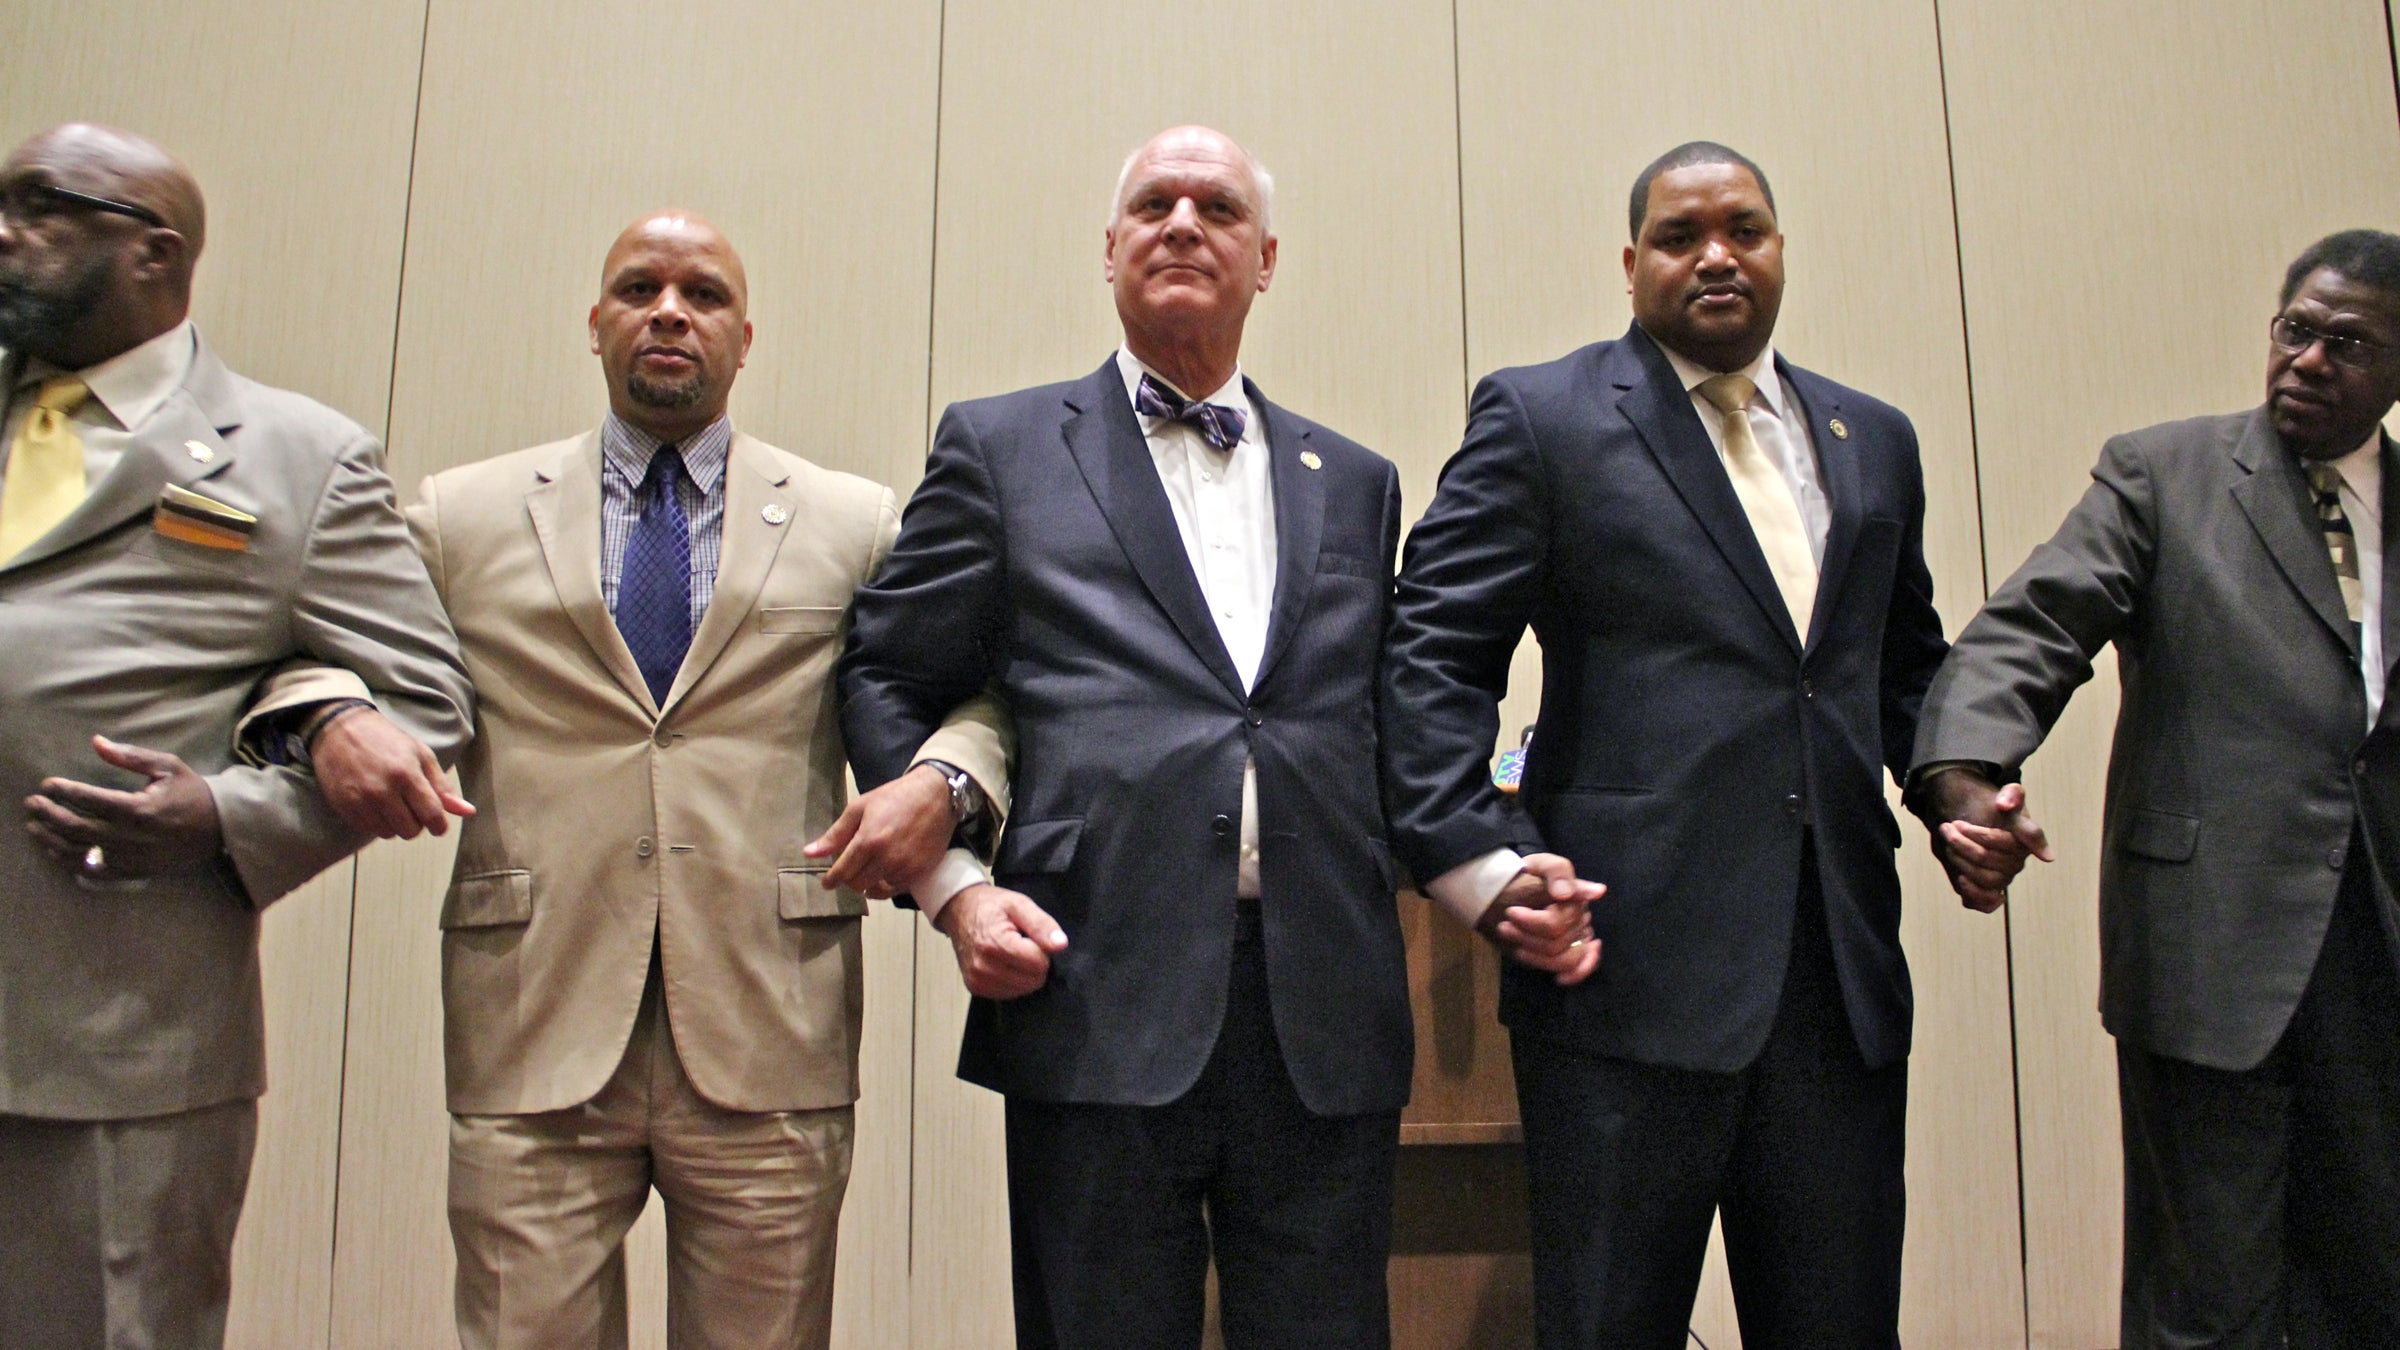  Atlantic City Mayor Don Guardian (center) holds hands with other elected officials as a show of solidarity against a proposed state takeover of the resort city. (Emma Lee/WHYY) 